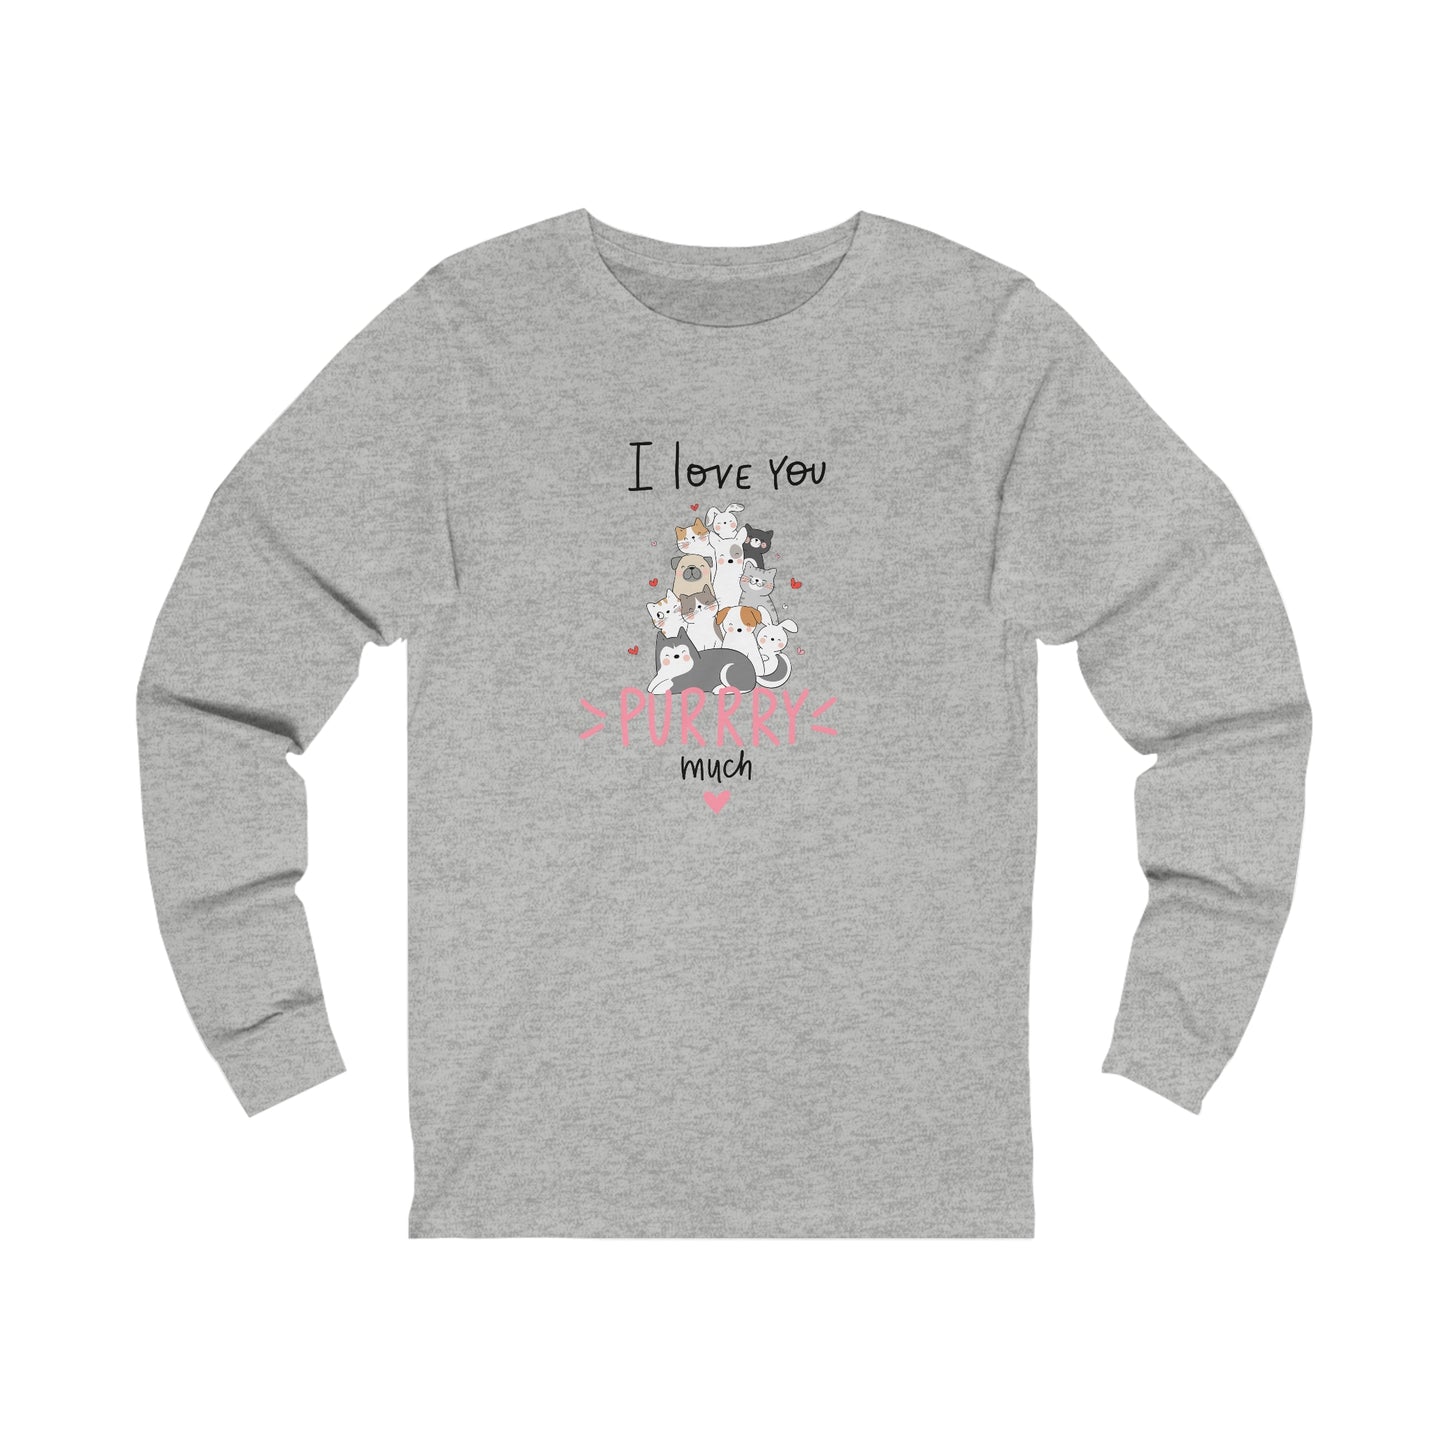 Adorable Animals that Love You Purry Much. Unisex Jersey Long Sleeve Tee